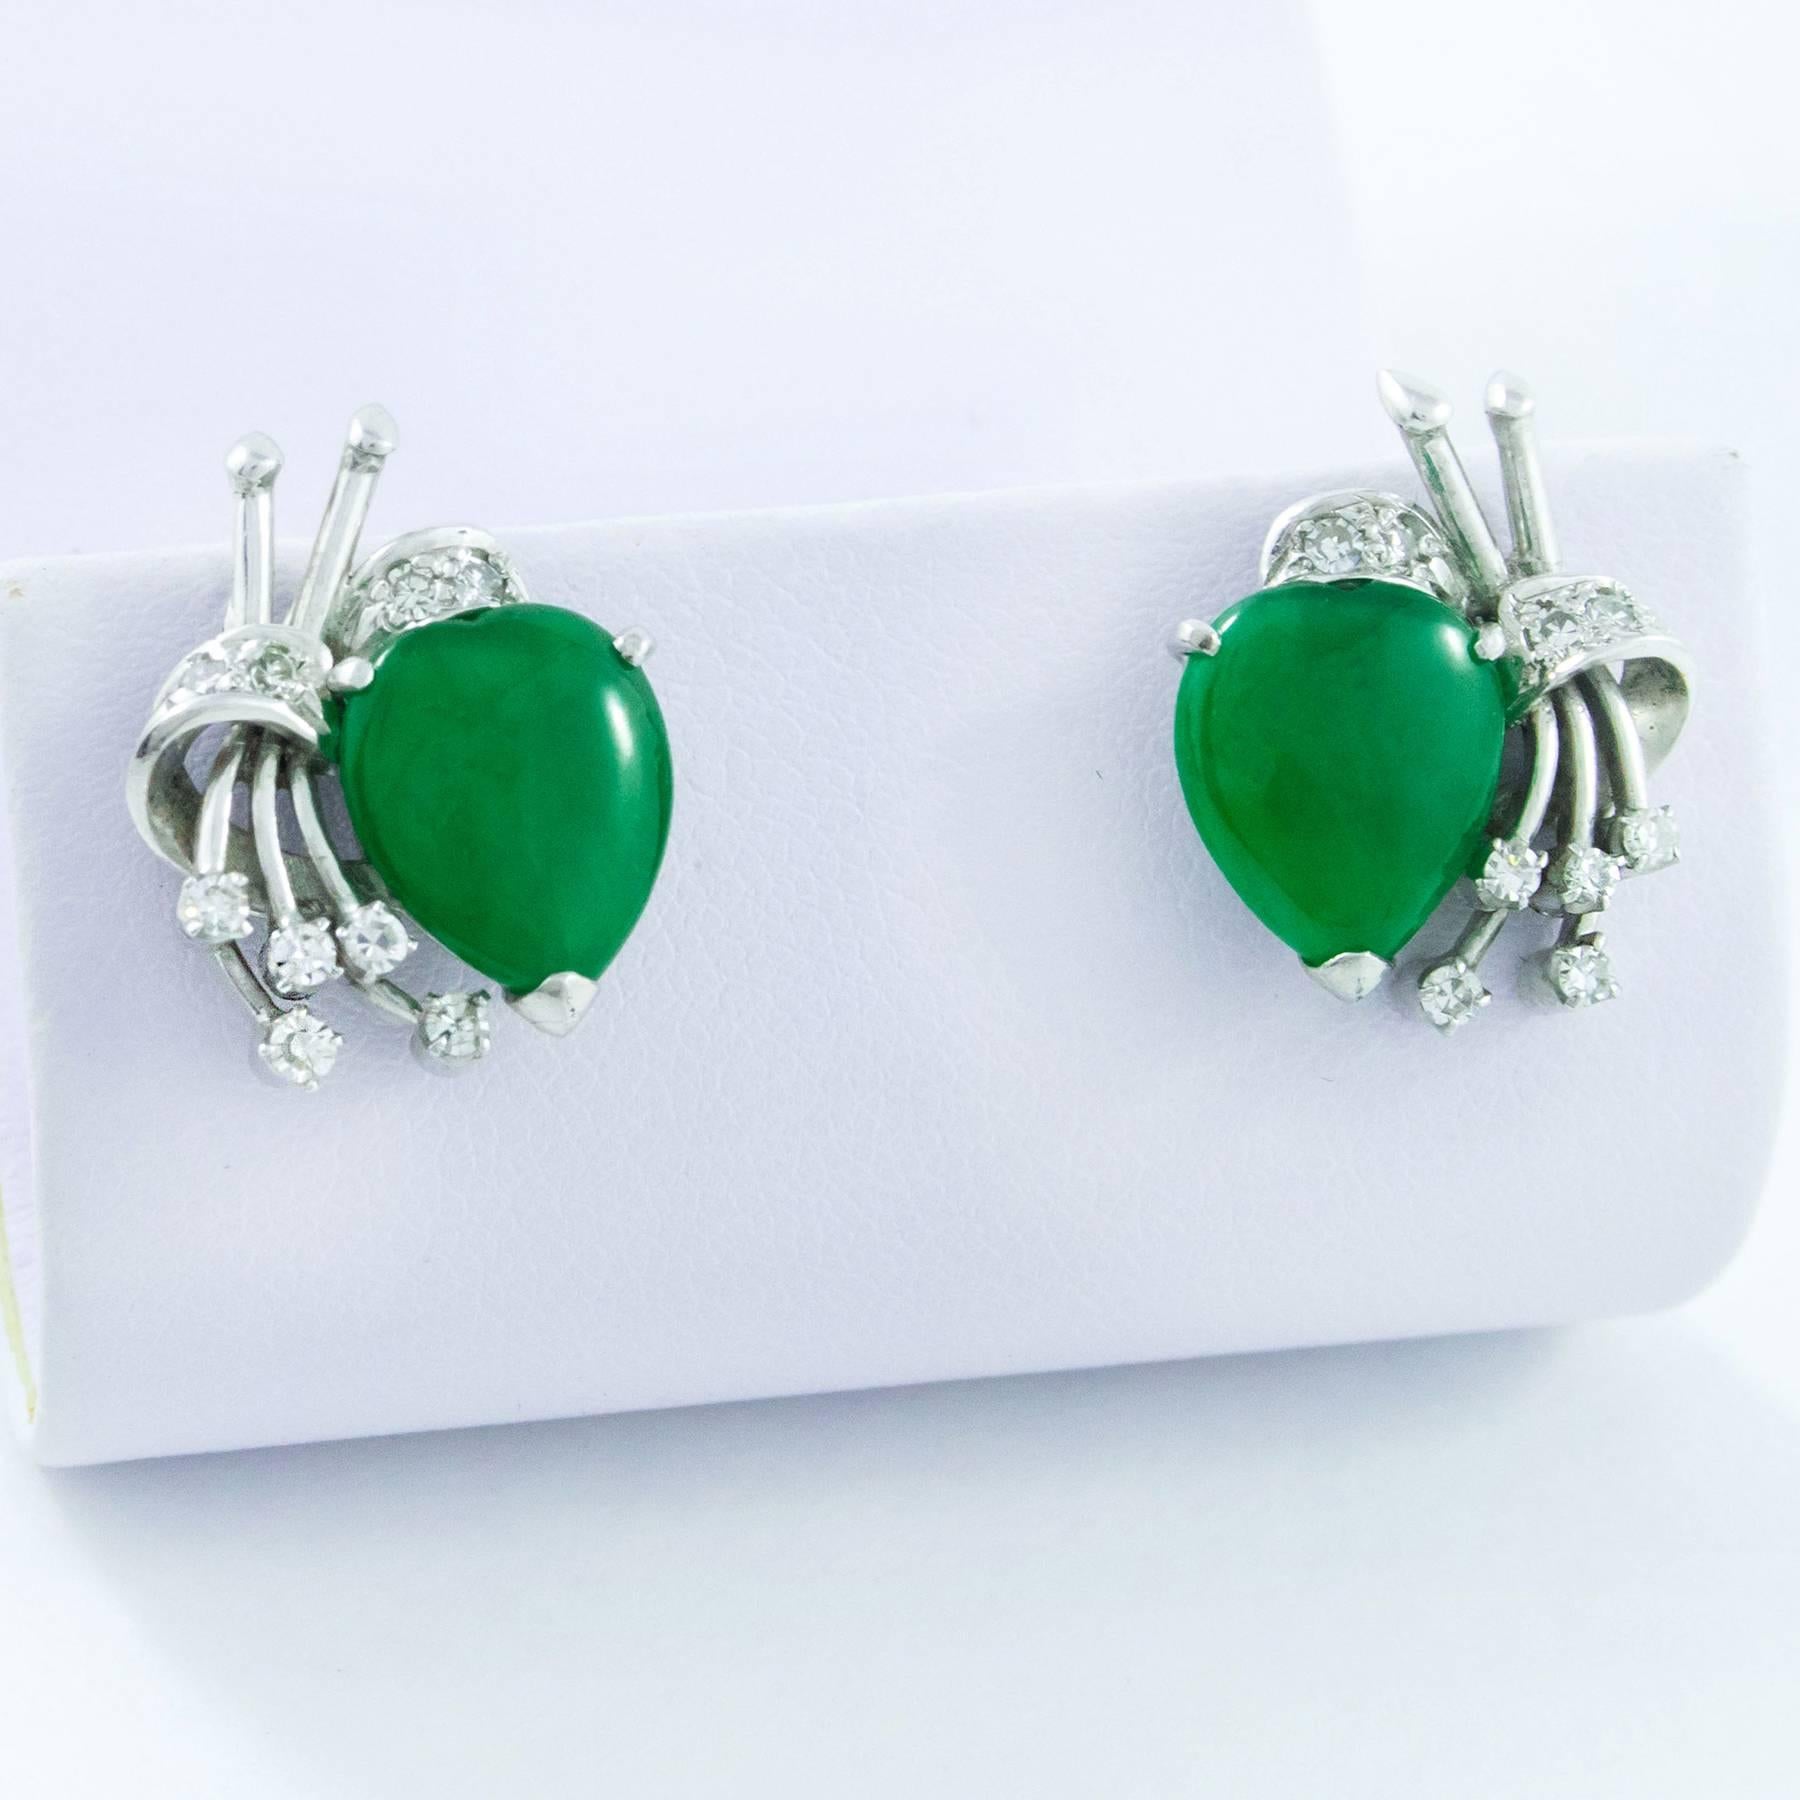 Glorious Jadeite Diamond White Gold Earrings In Excellent Condition For Sale In Toronto, Ontario